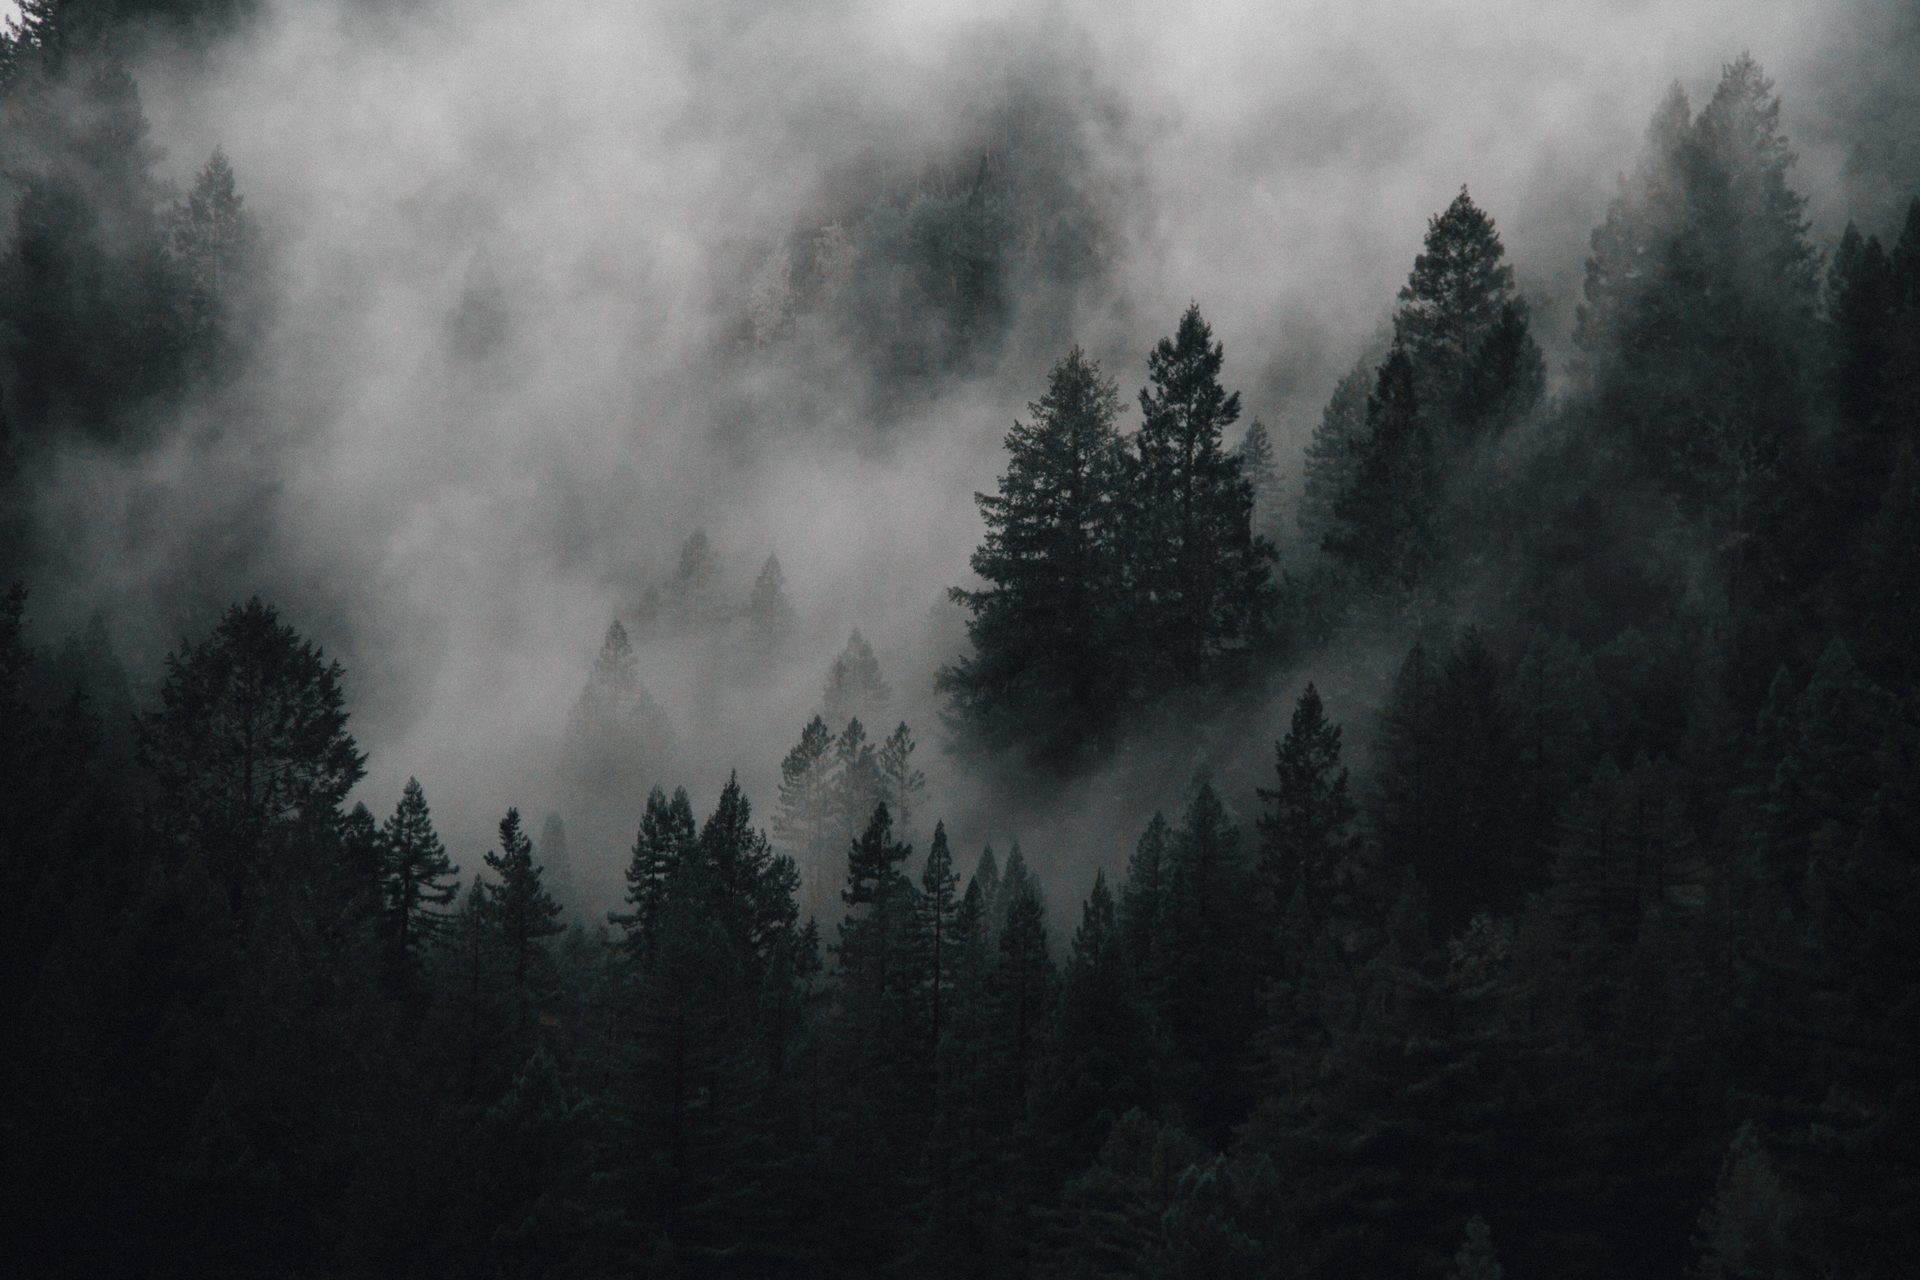 Natural landscape, Cloud, Atmosphere, Plant, Tree, Fog, Grey, Wood, Larch, Evergreen